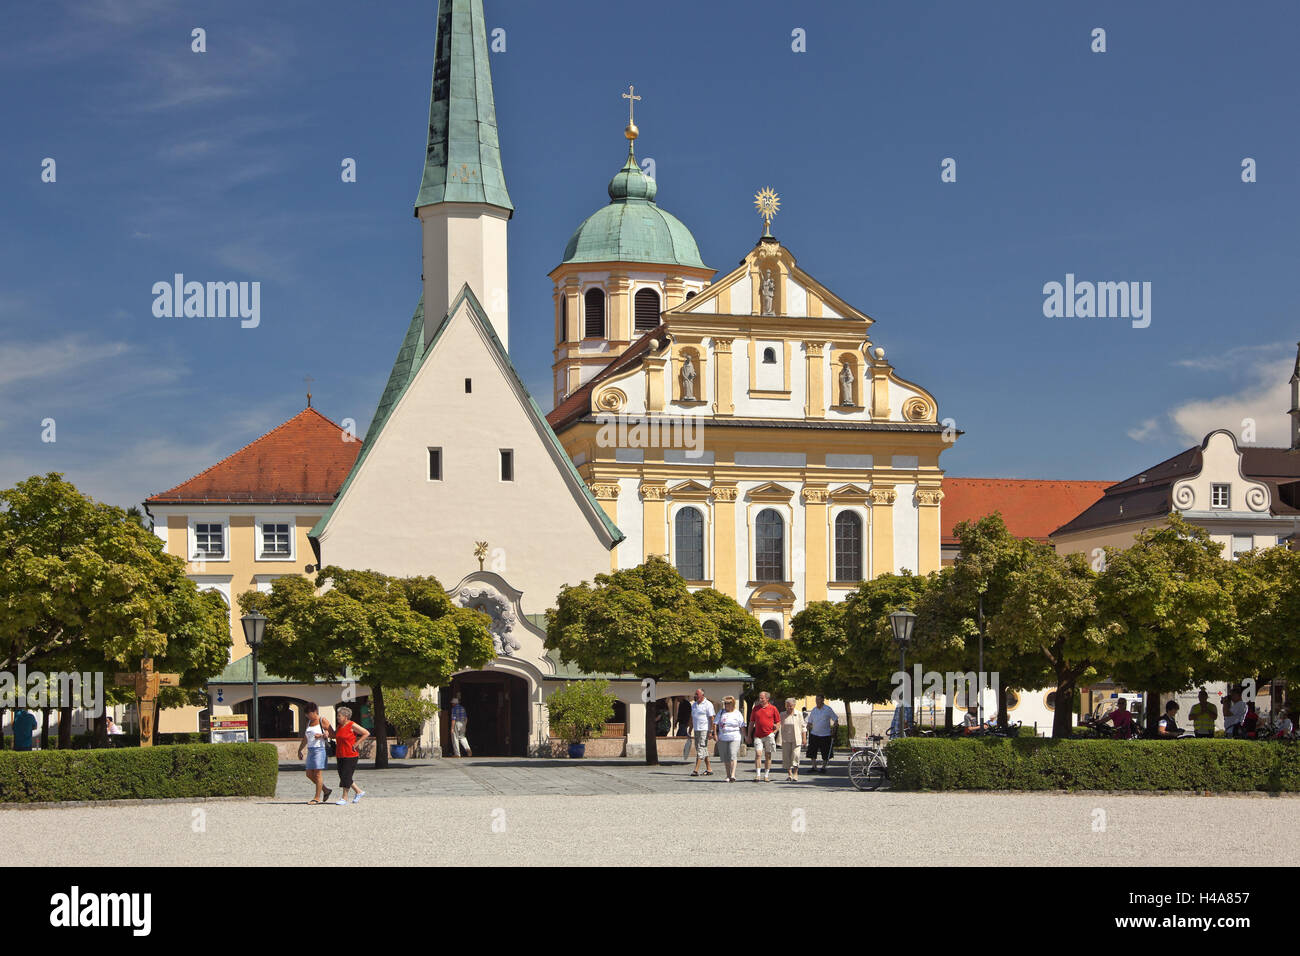 Germany, Upper Bavaria, Altötting, band space, visitor, town, architecture, pilgrimage, church, band, space, religion, grace band, town parish church, structure, sacred building, faith, pilgrimages, place of pilgrimage, pilgrim's sites, religion, steeple, tower, Germany, piece Magdalena, person, place of interest, Stock Photo